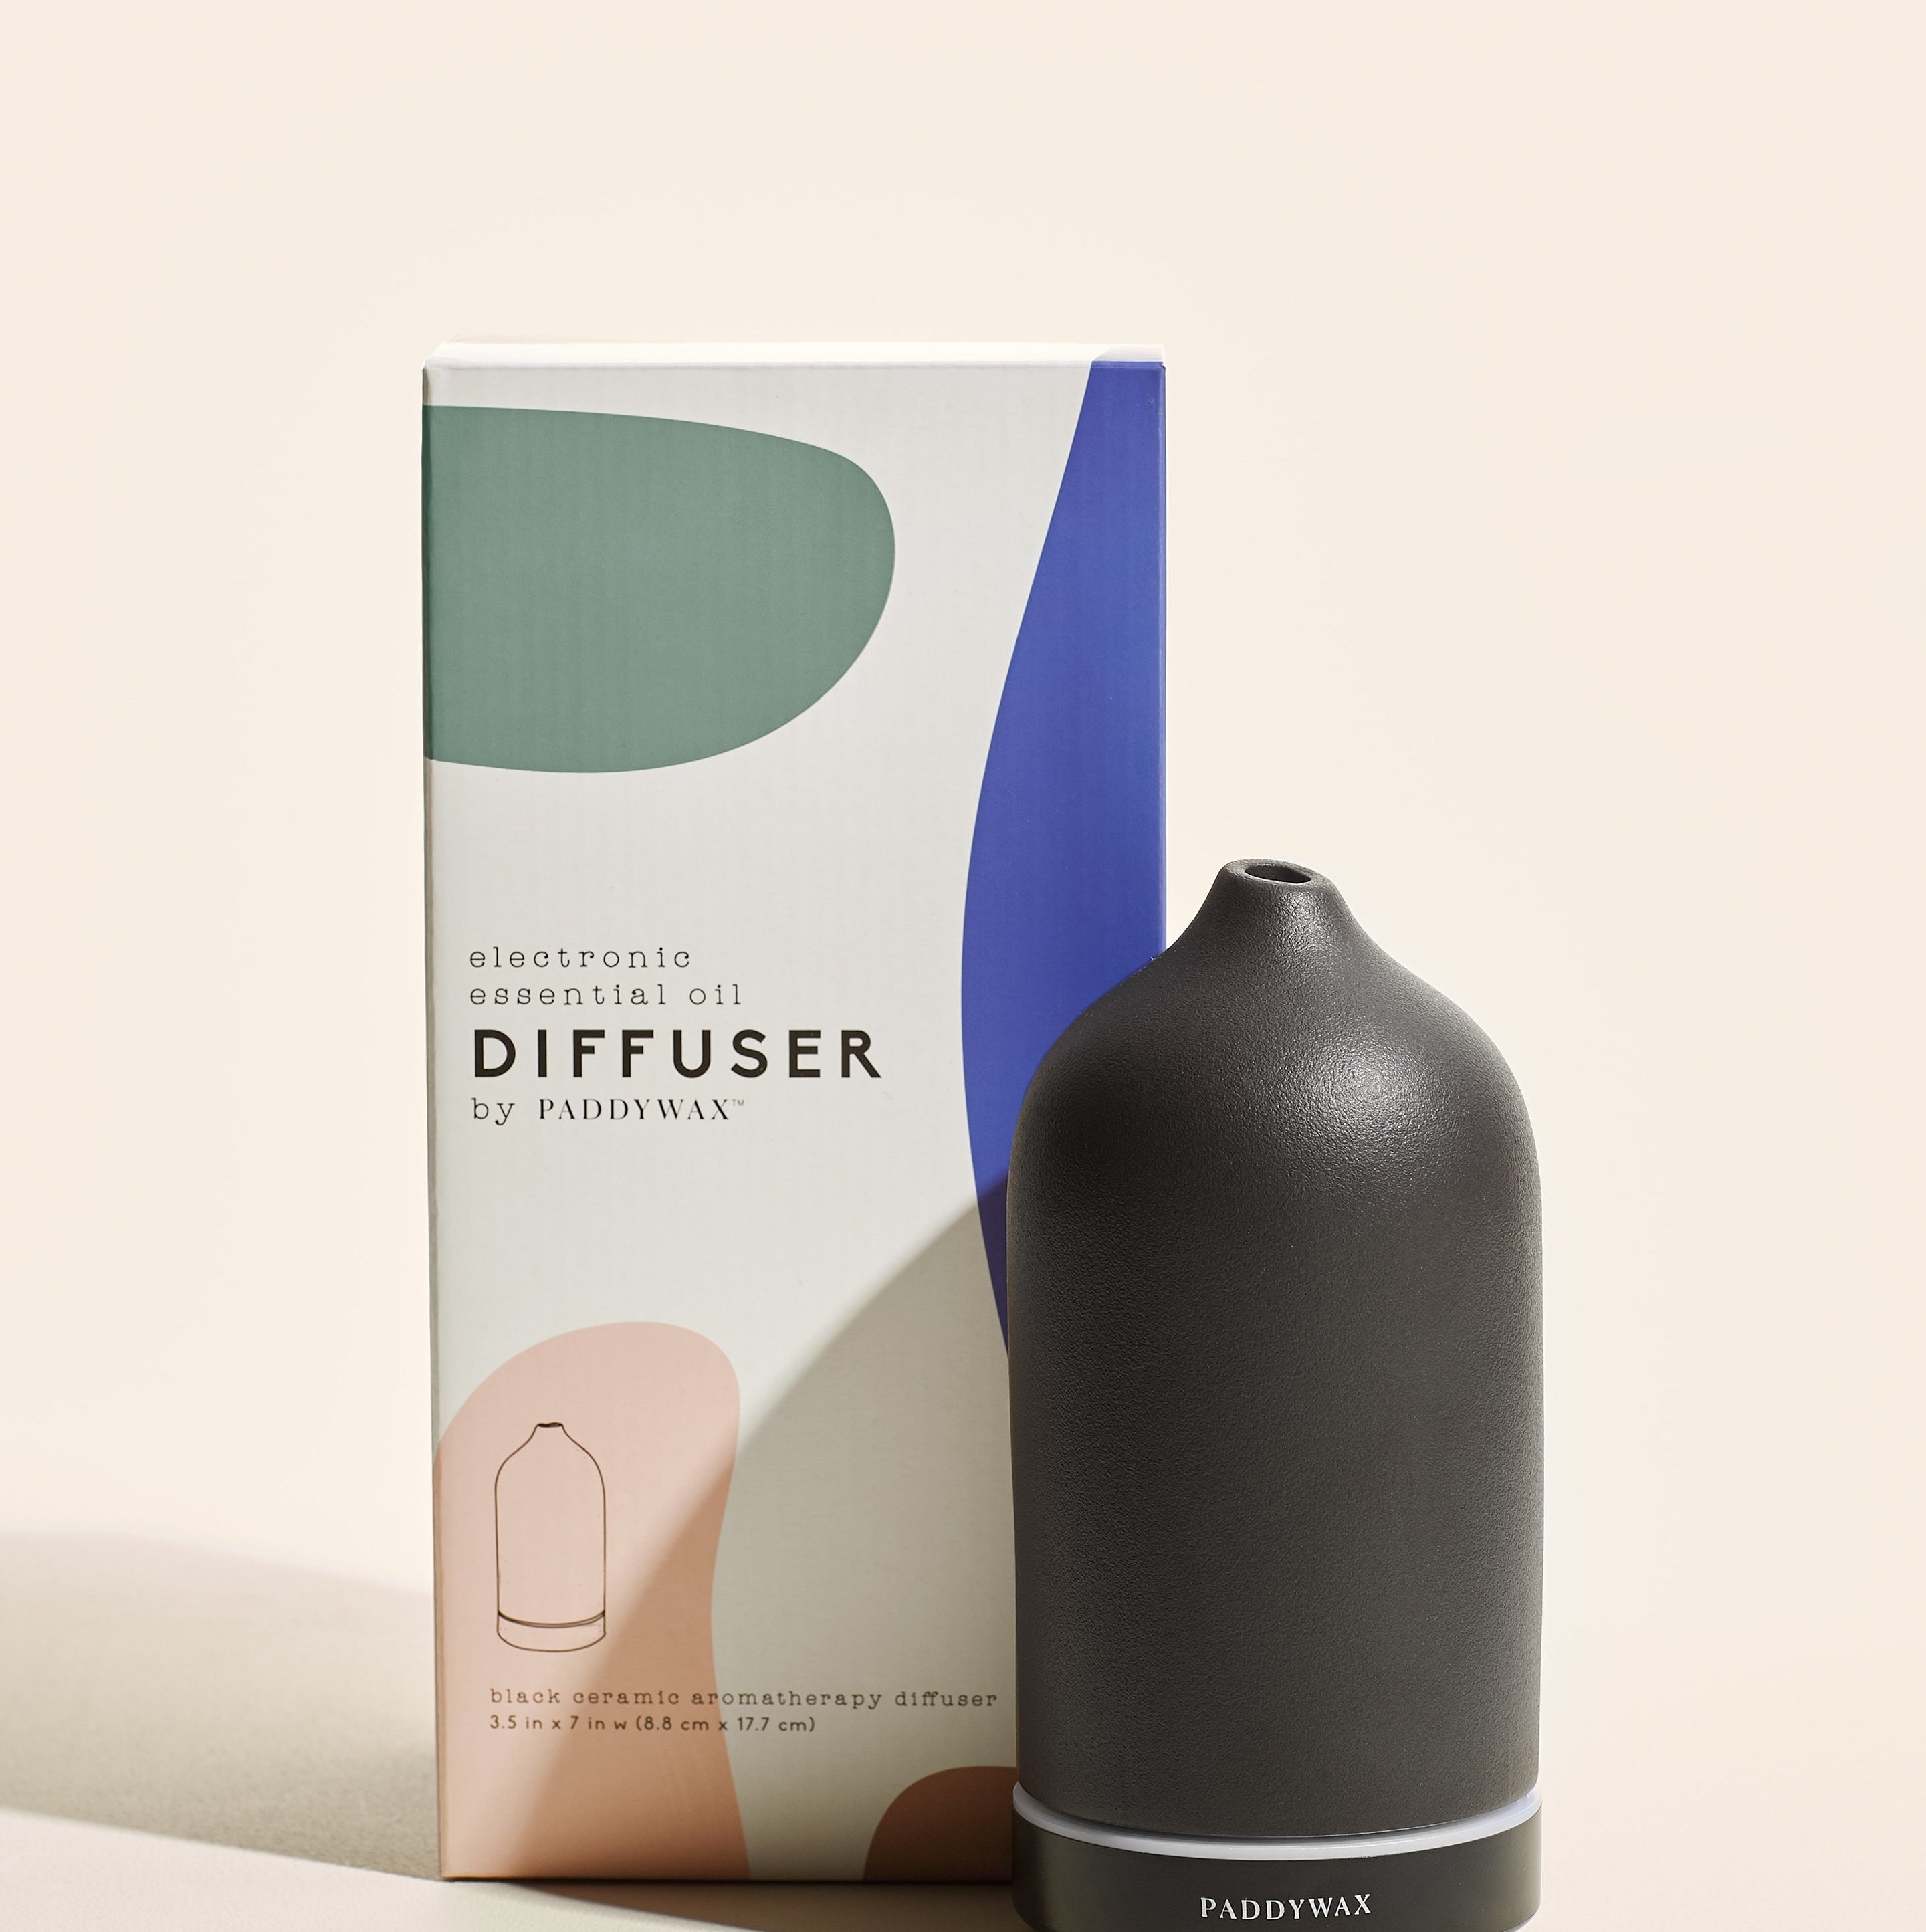 The black essential oil diffuser posed in front of its packaging